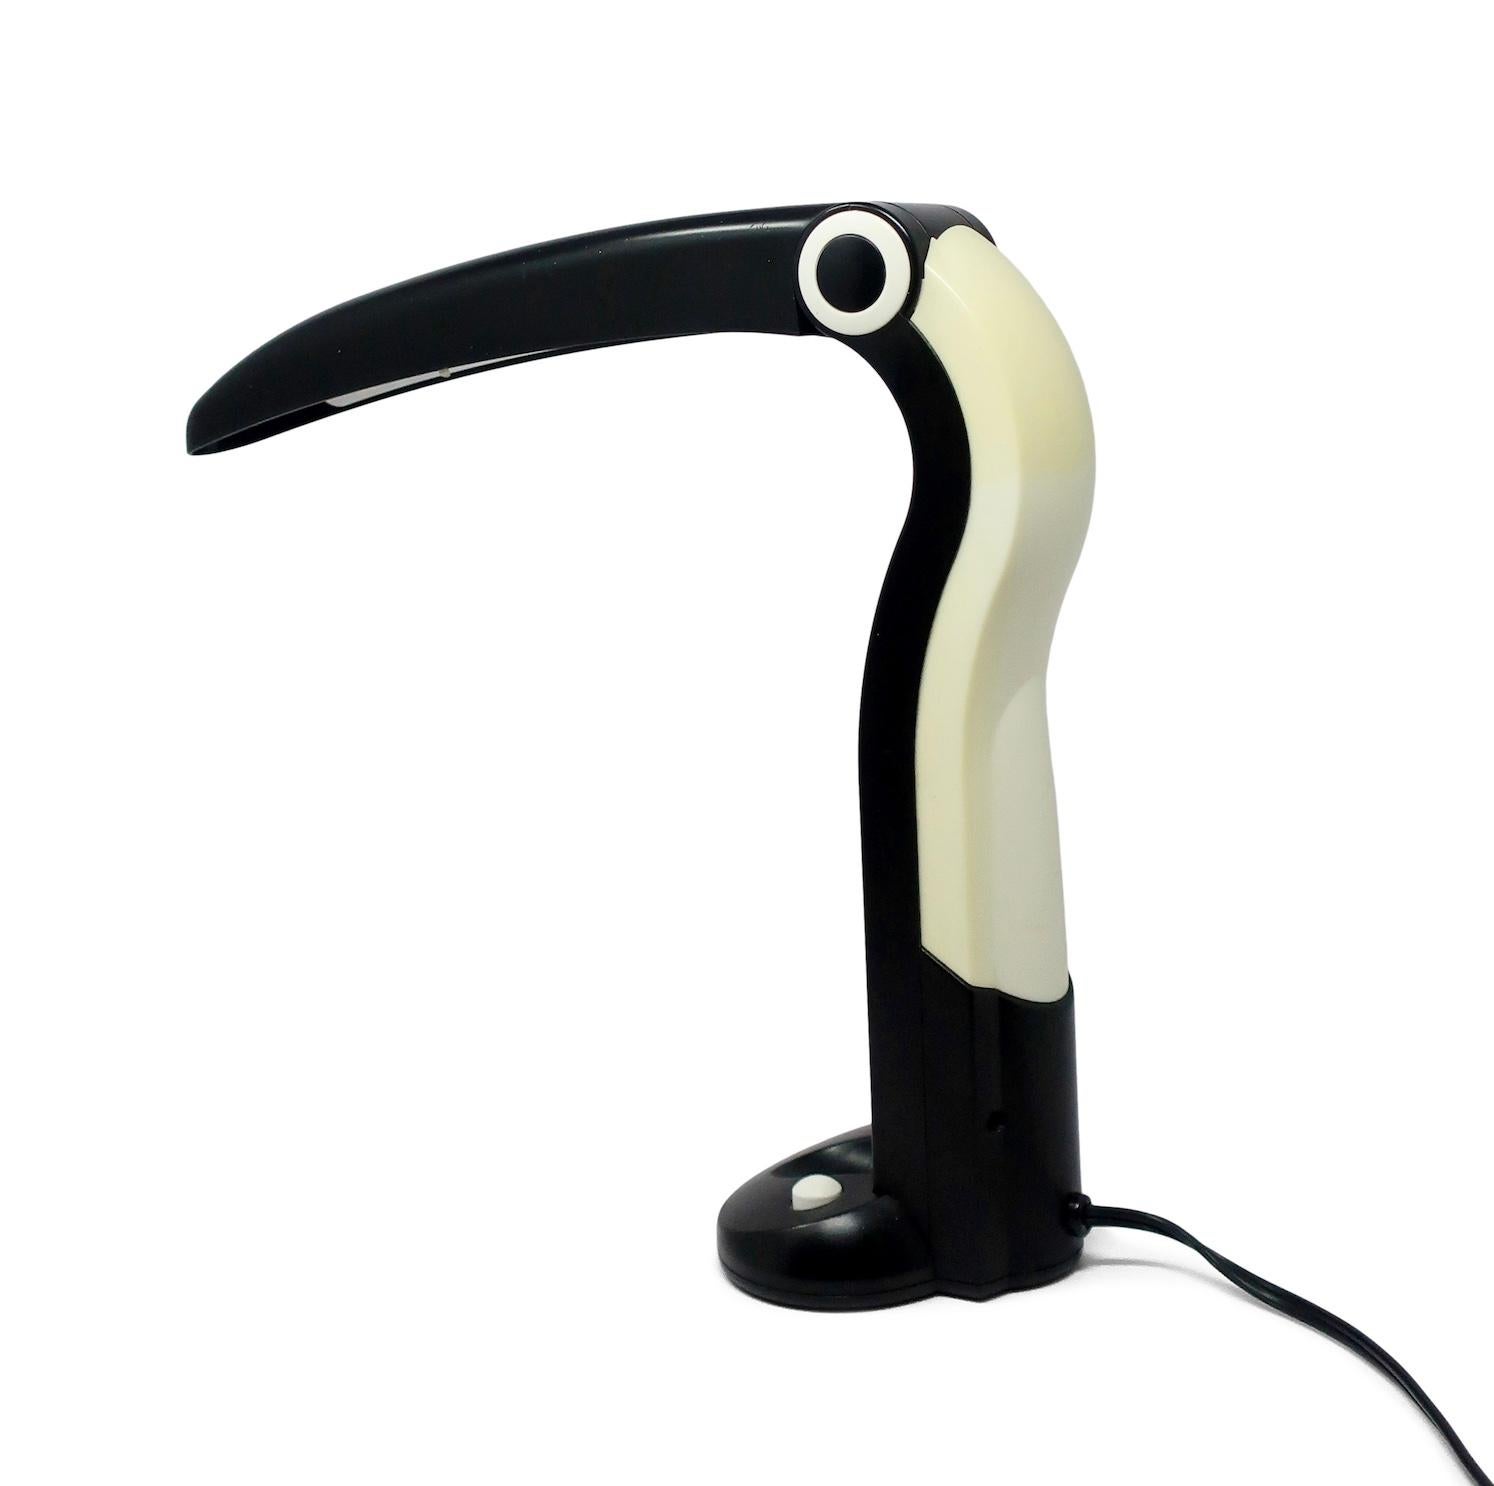 An excellent postmodern white and black folding desk lamp in the form of toucan.  Endlessly charming, it takes a single fluorescent bulb and has on/off switch on the base.

In good vintage condition with wear consistent with age and use, including